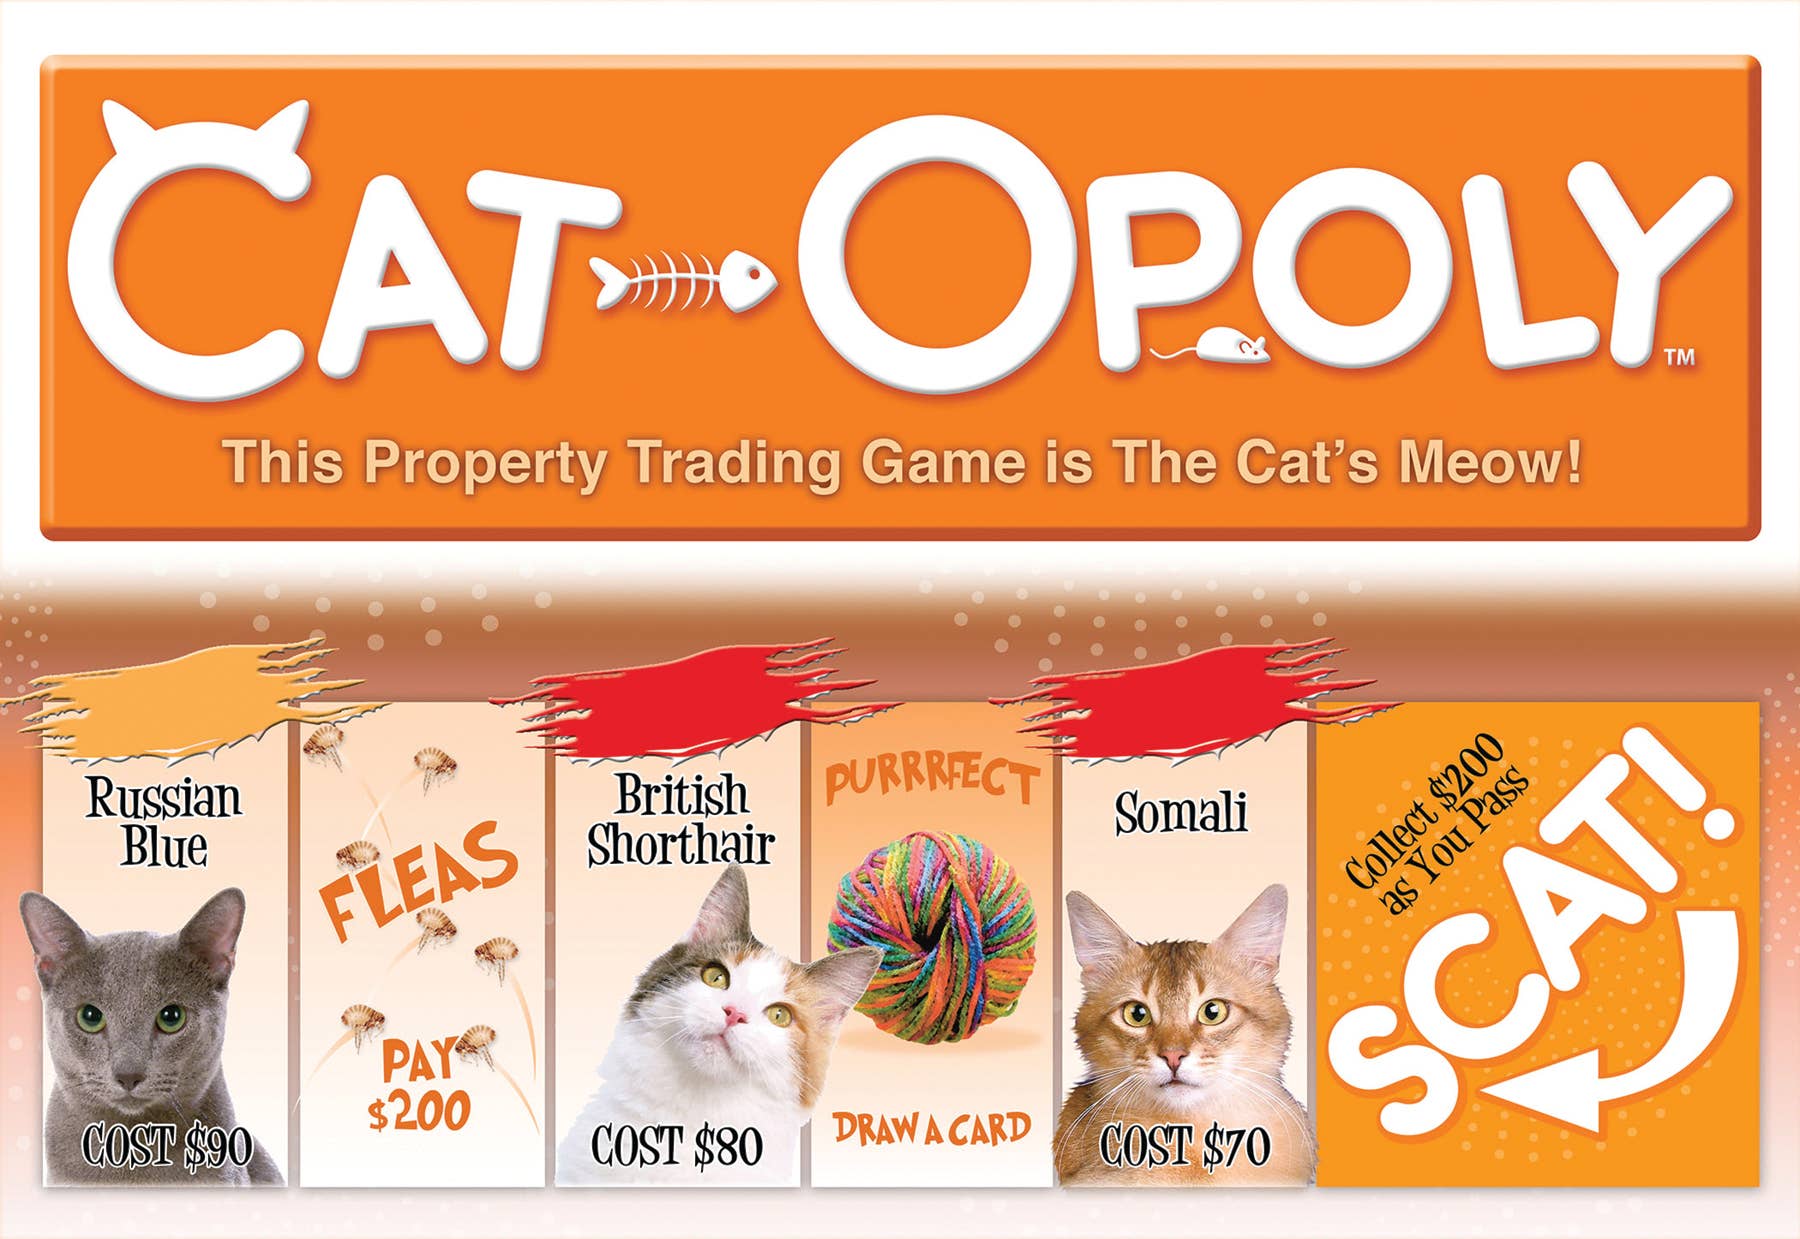 Cat-Opoly, This property trading game is the cat's meow! Great gift idea for cat lovers and feline finatics